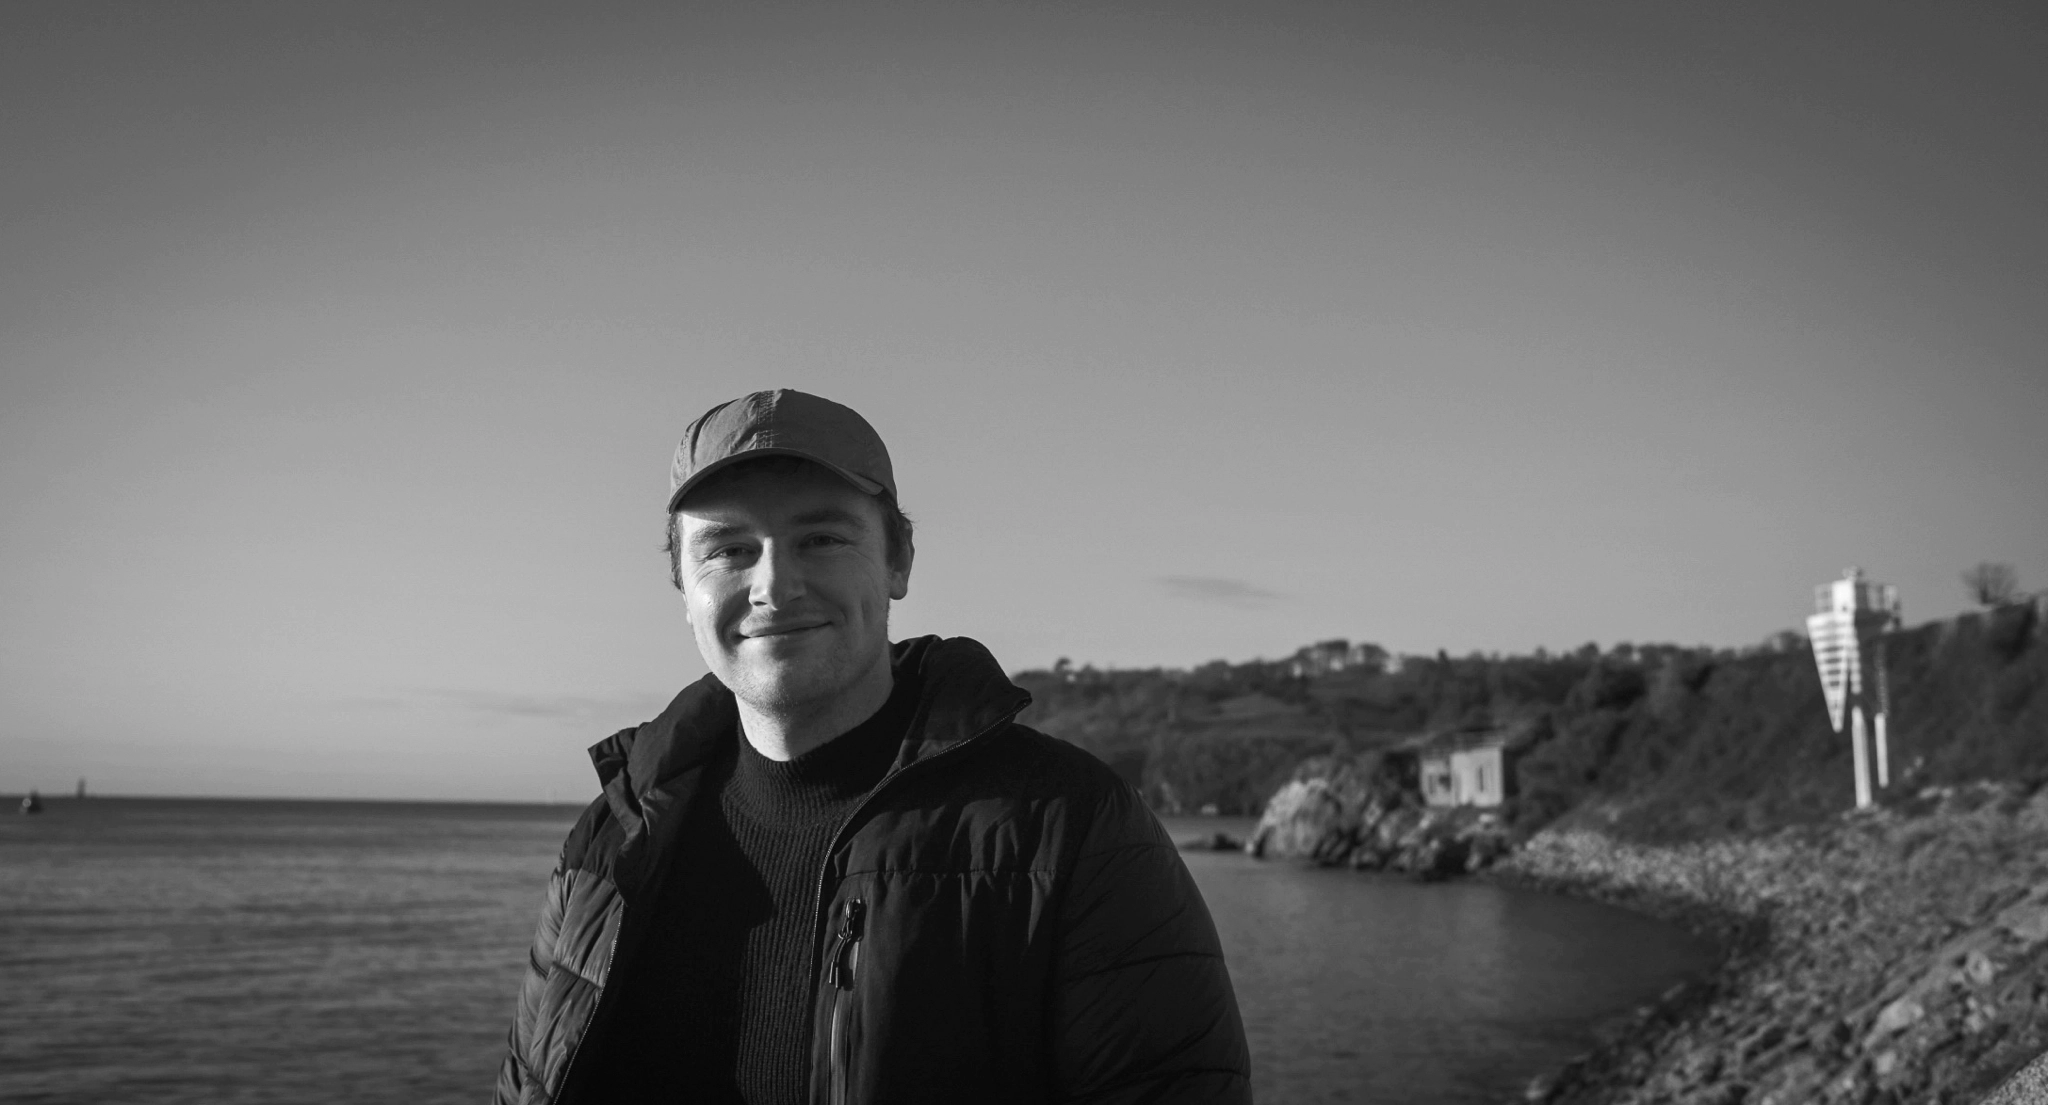 A photograph of me smiling at the camera, taken on a cold, sunny day on an outlook over the ocean. Plymouth, February 2022.